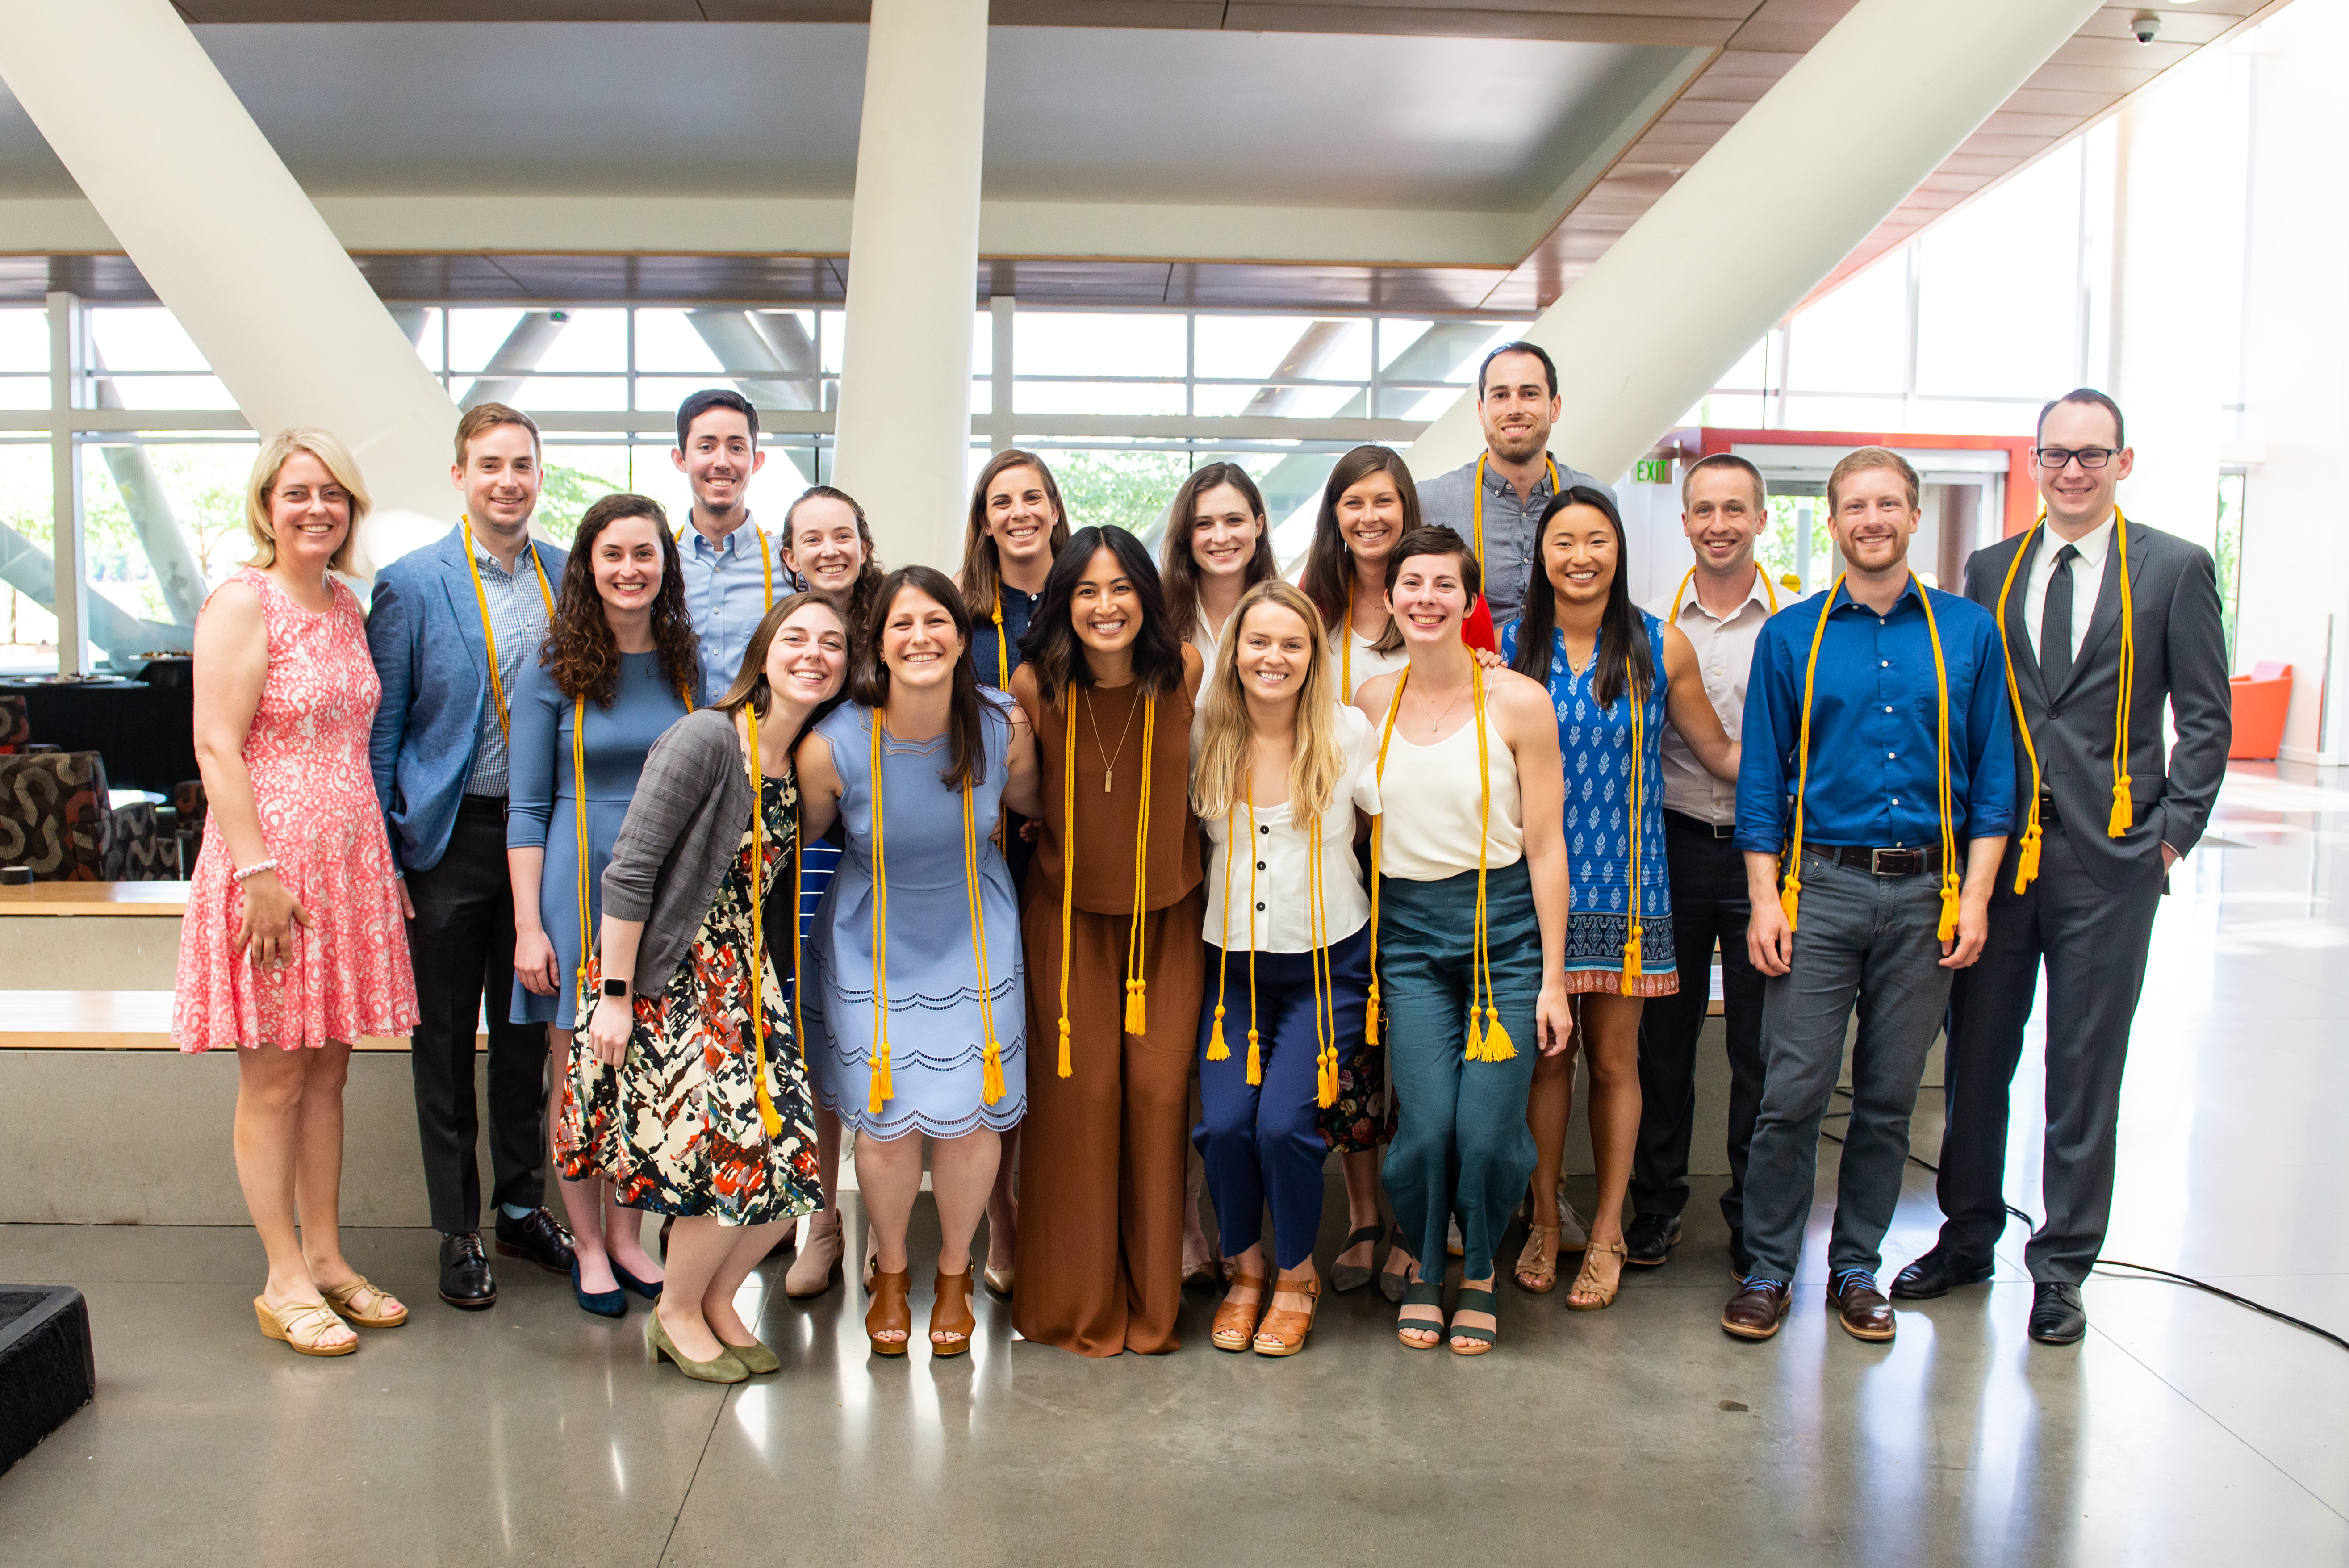 SOM Honors and Awards 2019 - group photo of award winners with honor cords